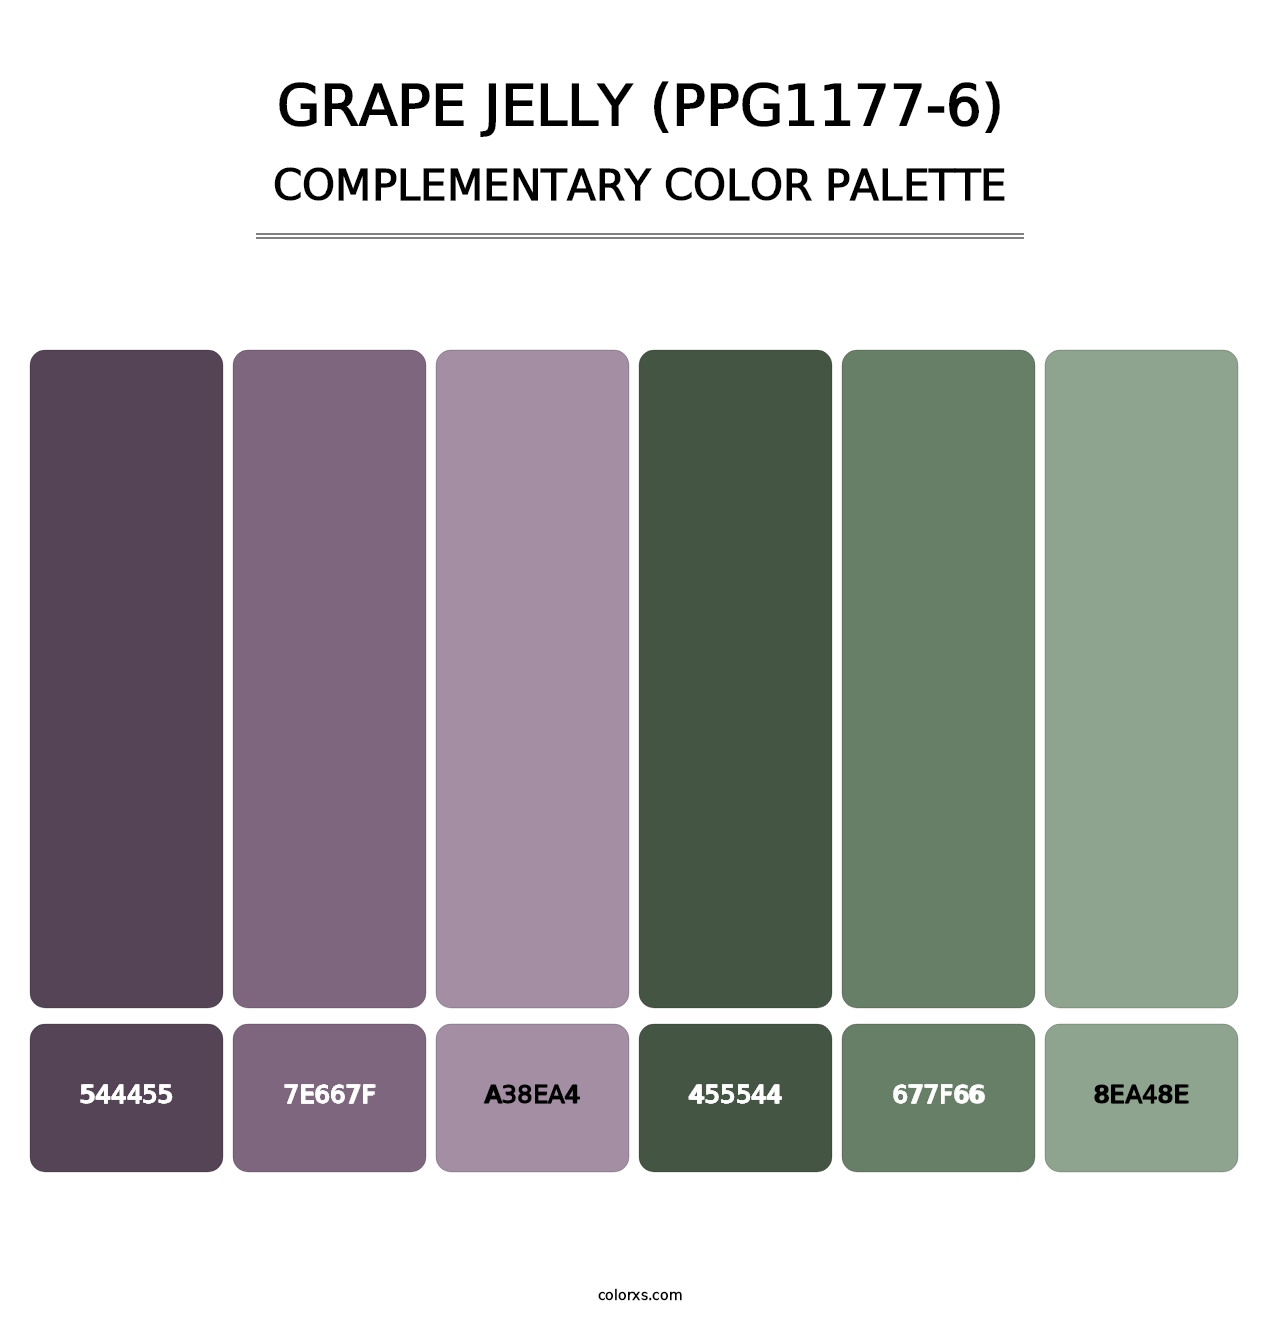 Grape Jelly (PPG1177-6) - Complementary Color Palette